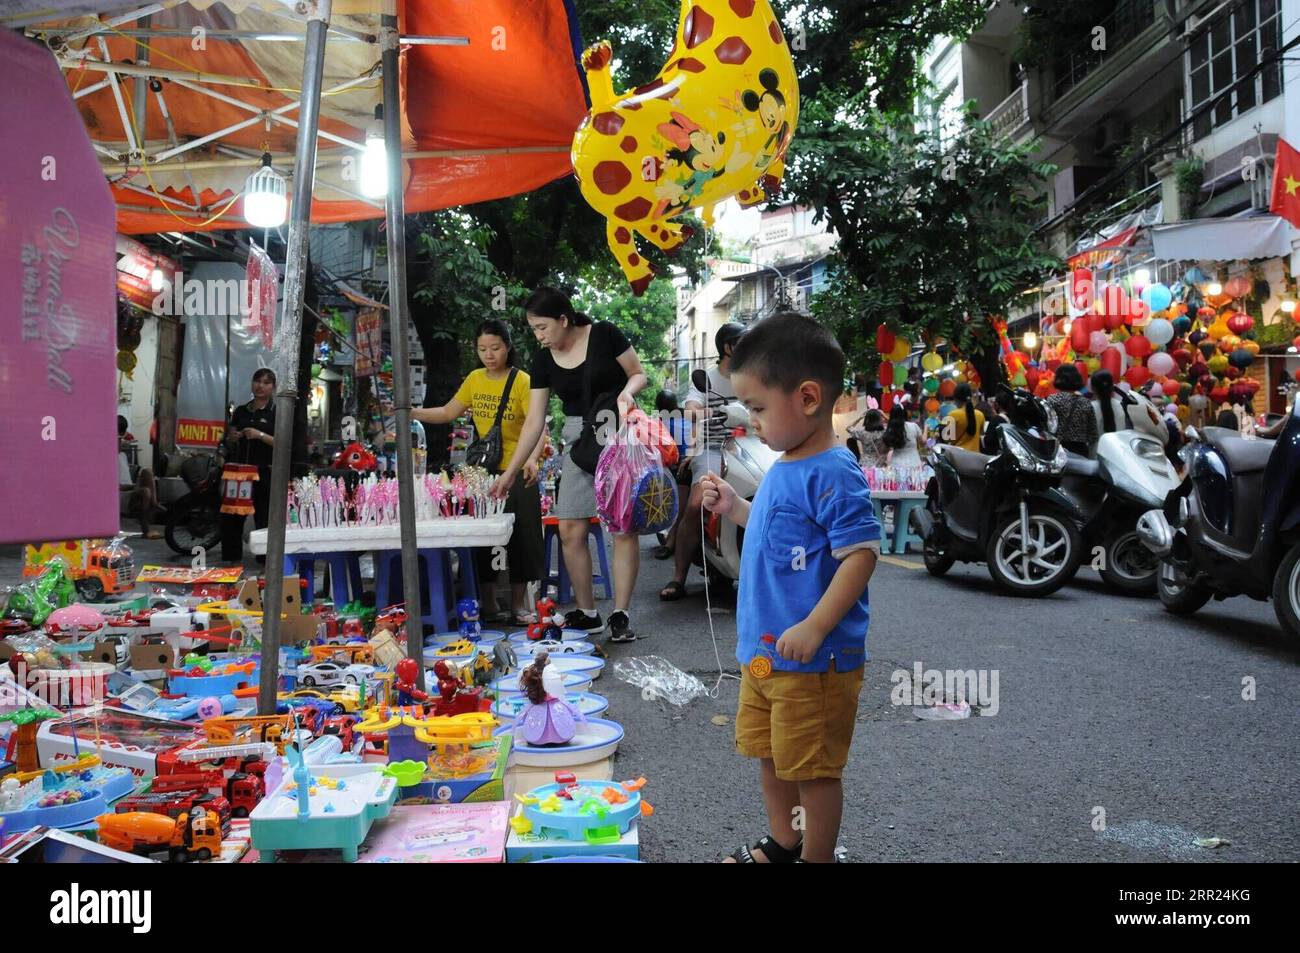 201002 -- HANOI, Oct. 2, 2020 -- A boy selects toys at a stall in an ancient block in Hanoi, Vietnam, Oct. 1, 2020. A traditional Vietnamese Mid-Autumn Festival, celebrated on the eighth lunar month s full moon night, involves the customs of moon contemplating, procession of star and moon-shaped lanterns, lion dance, as well as holding parties with moon cakes and fruits amid the cool weather of autumn. Parents were busy during the harvest, so the holiday after that was a chance to spend time with their children. Over the years, it had been widely recognized as a festive event for kids across t Stock Photo